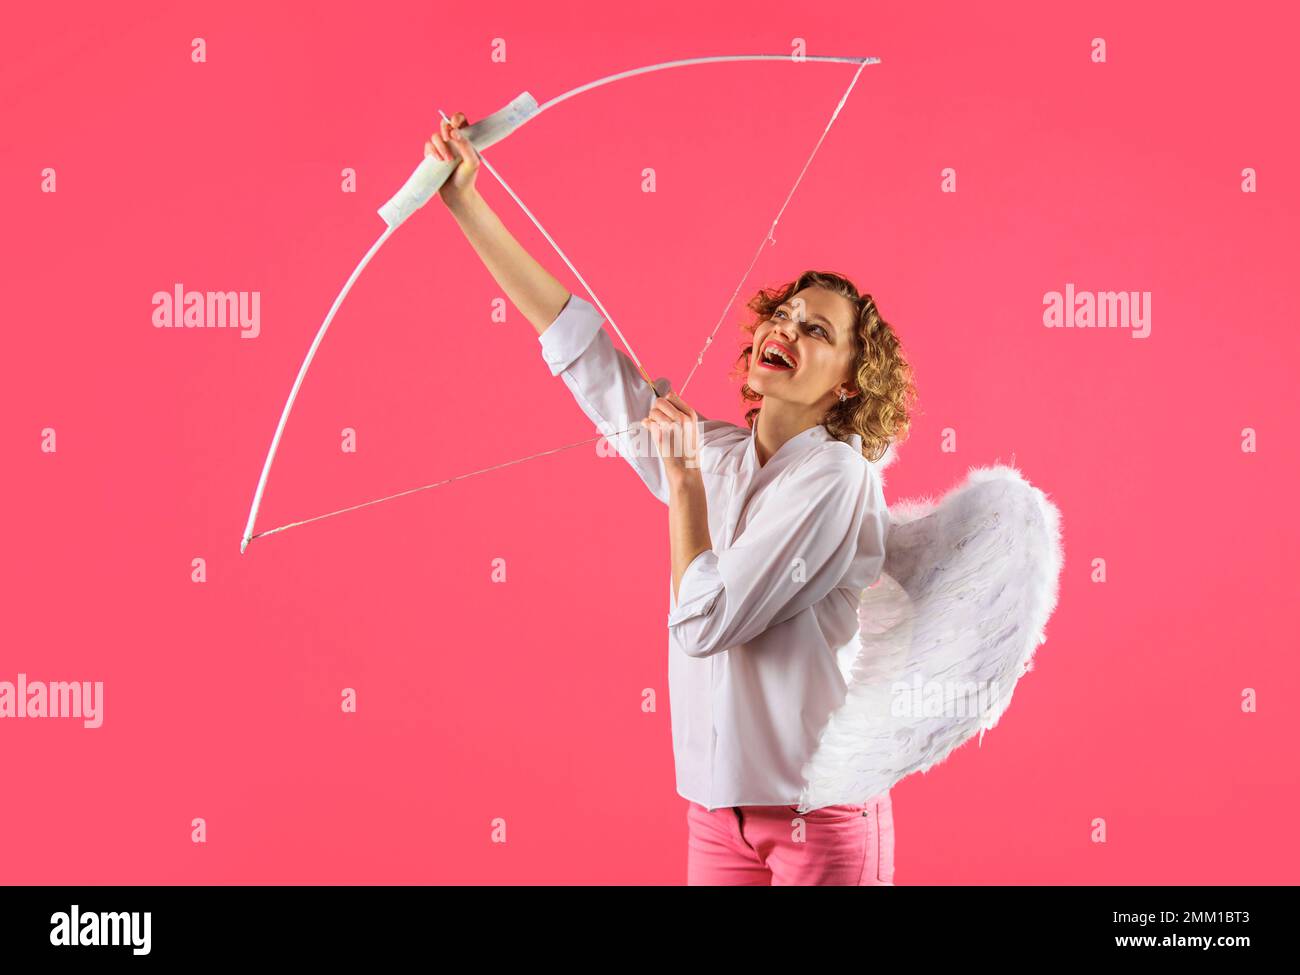 Angel girl aiming up with bow and arrow. February 14. Saint Valentines Day. Arrows of love. Cupid. Stock Photo